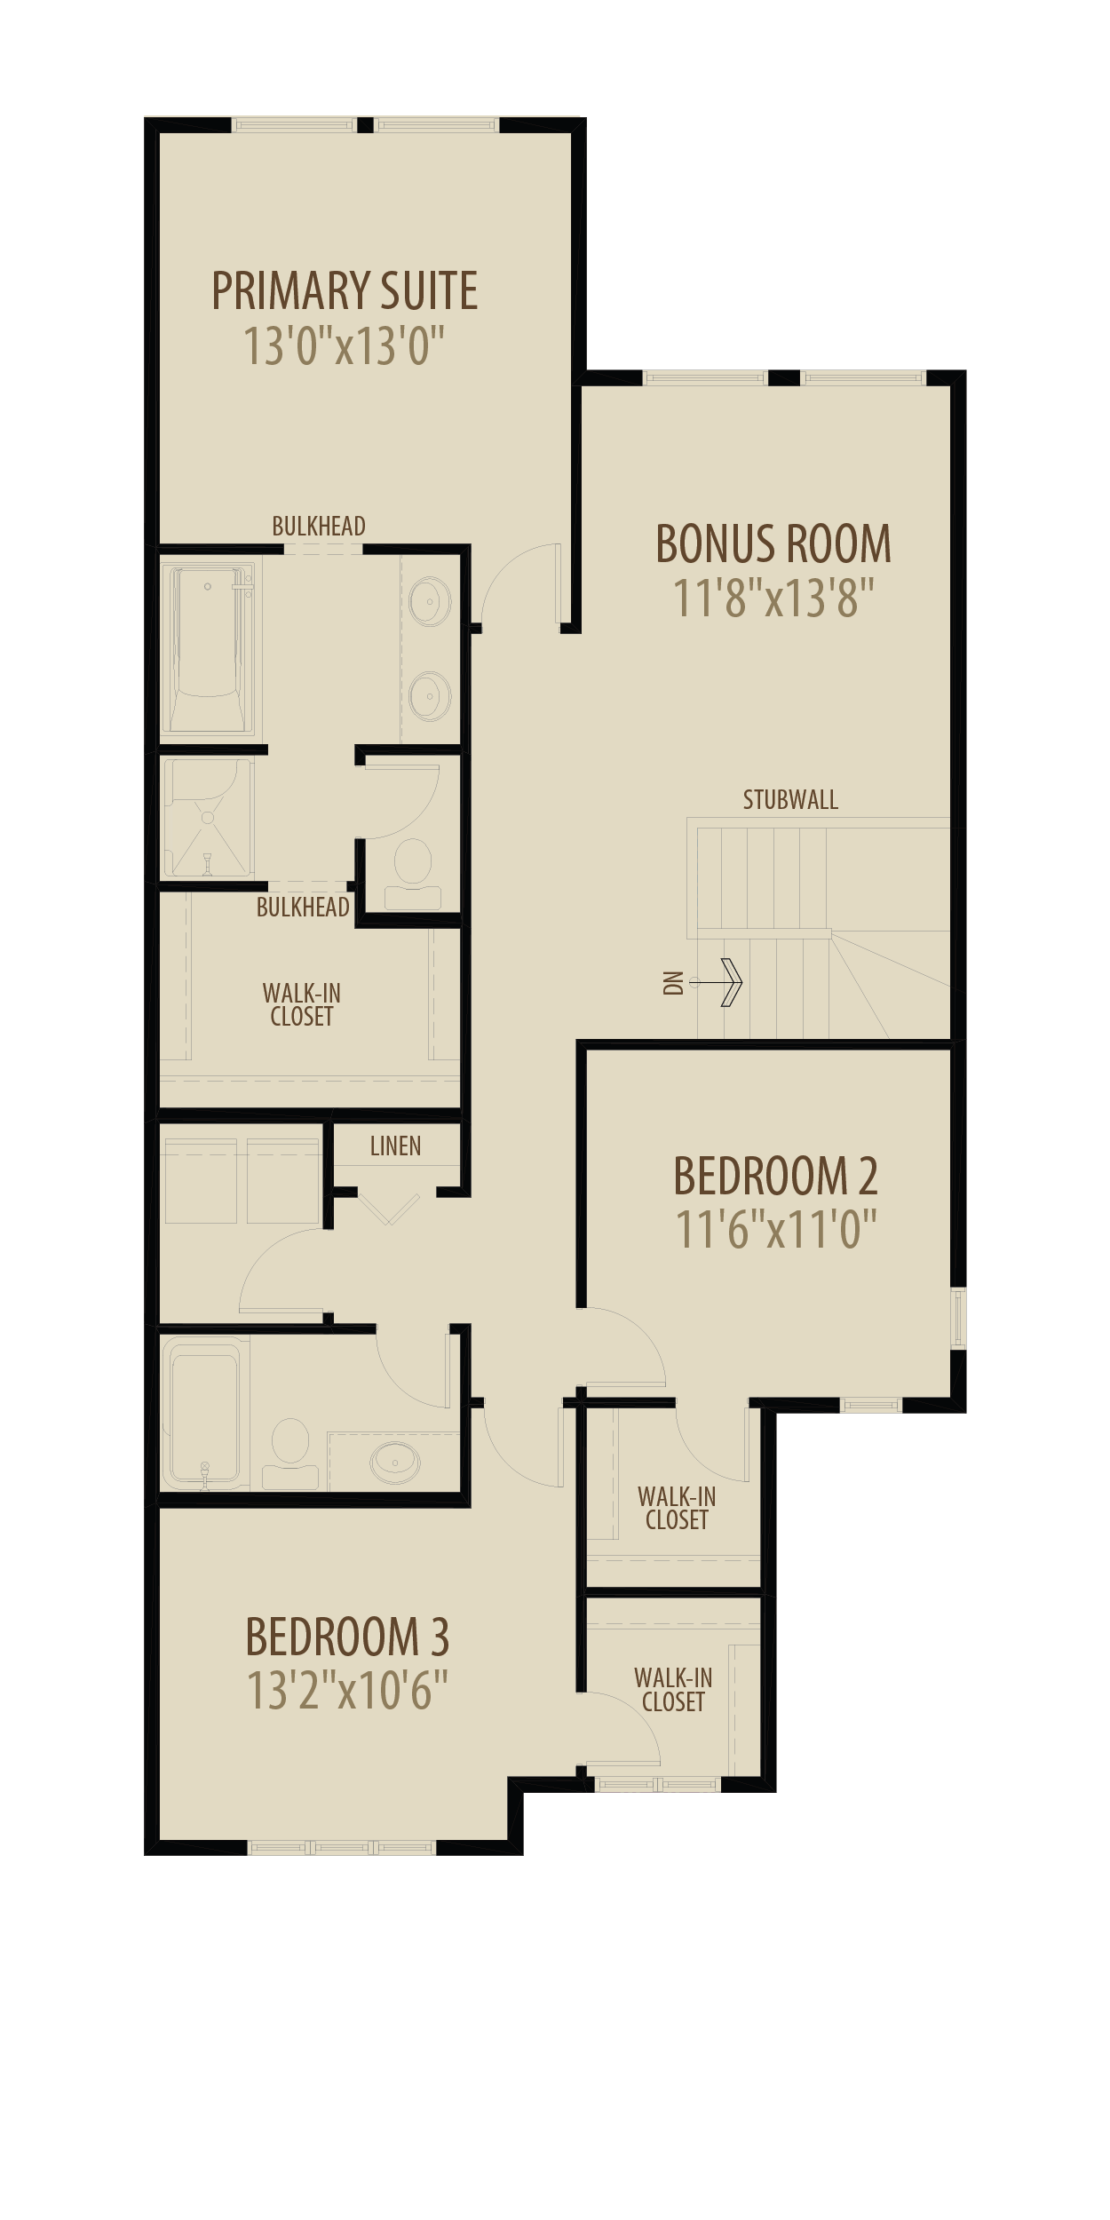 Expanded Bedroom adds 52 sq ft